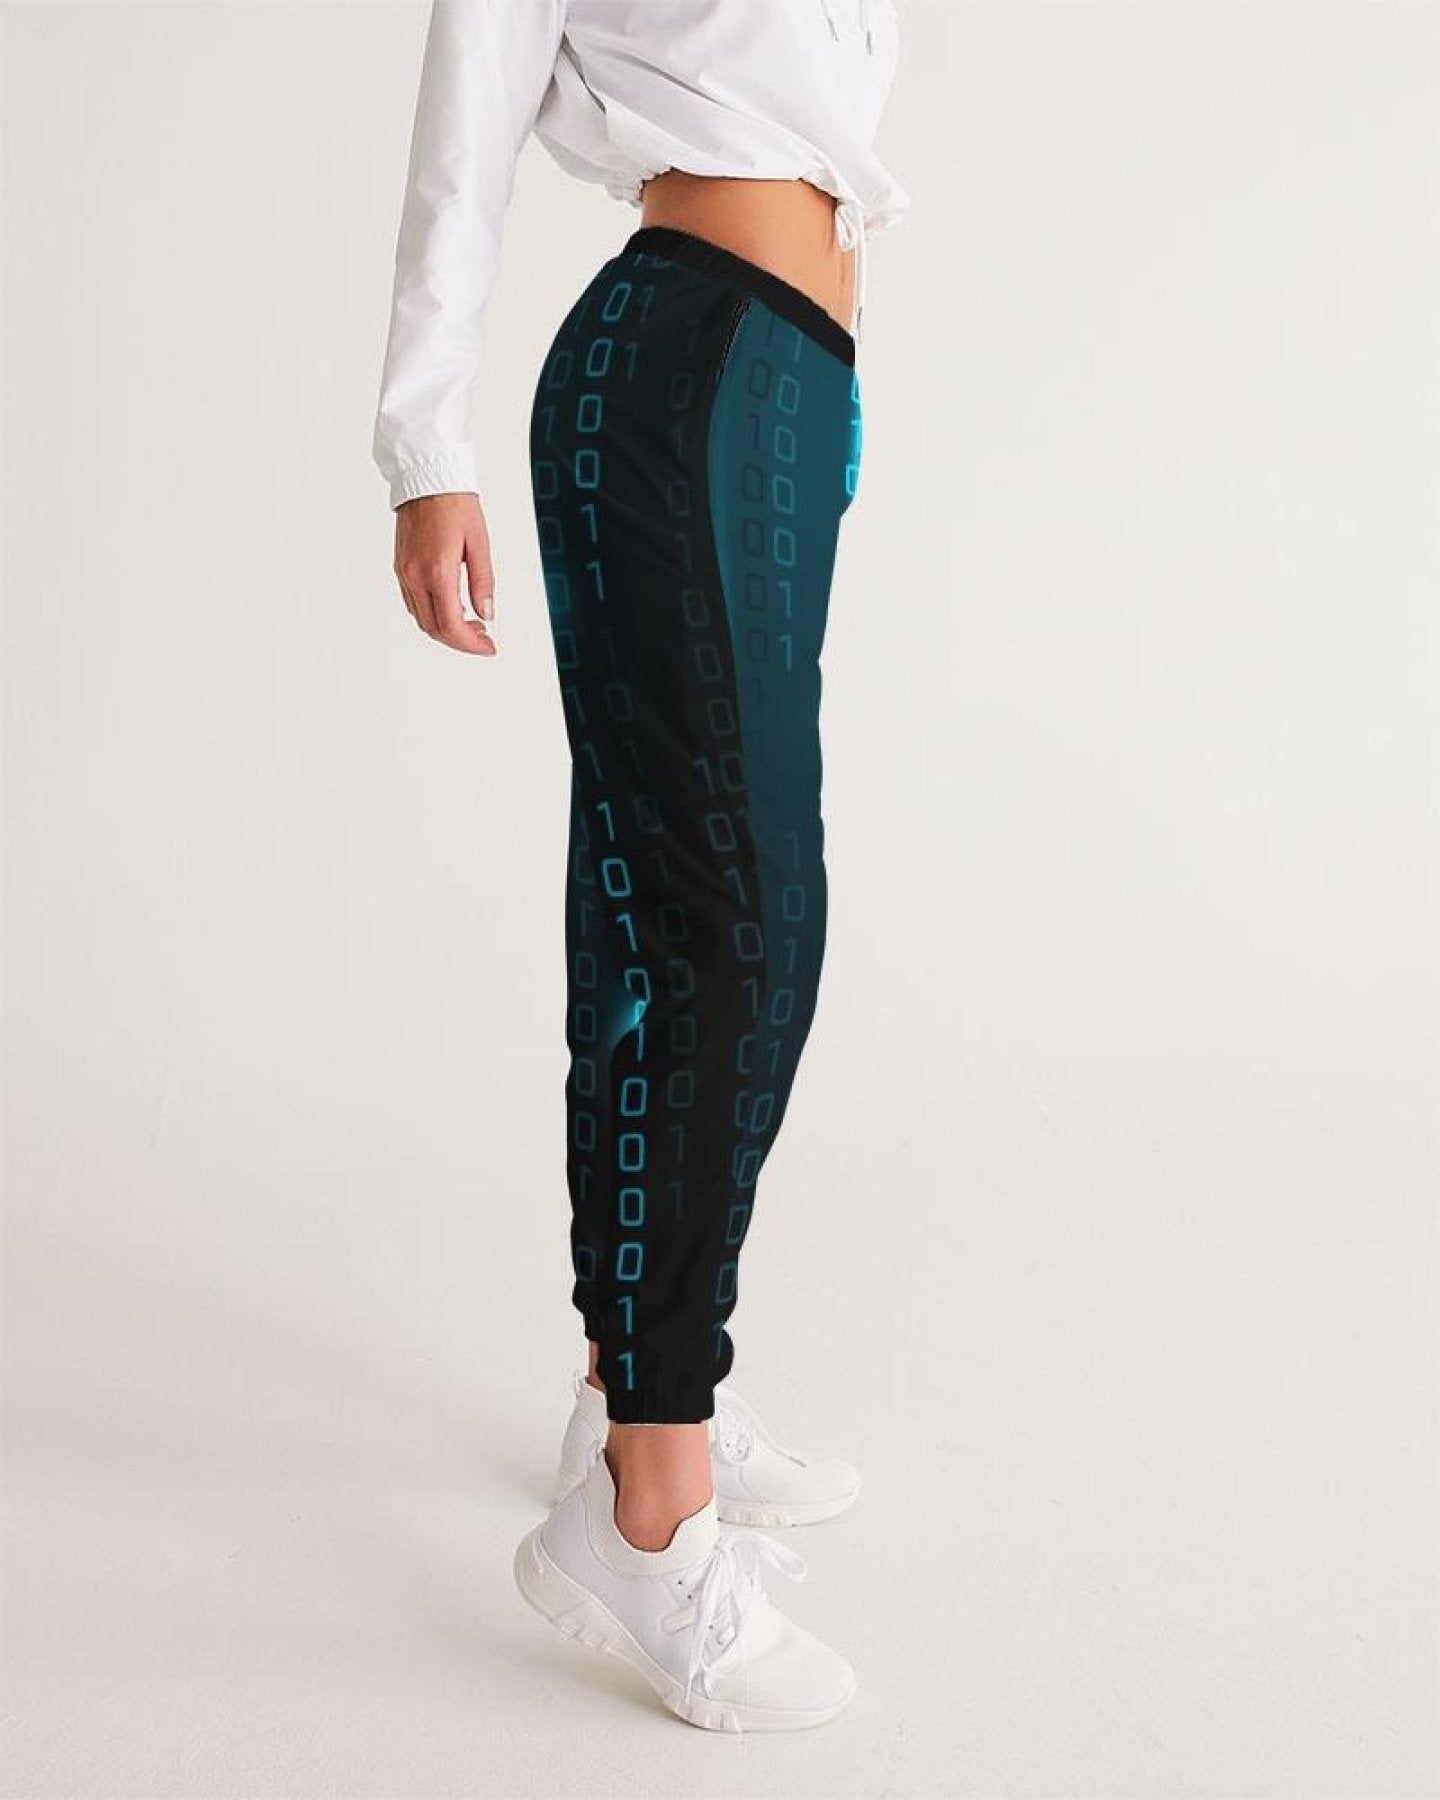 Elevate your active wardrobe with our Harley Track Pants. Discover comfort and style in our collection of women's track pants designed for your active lifestyle.